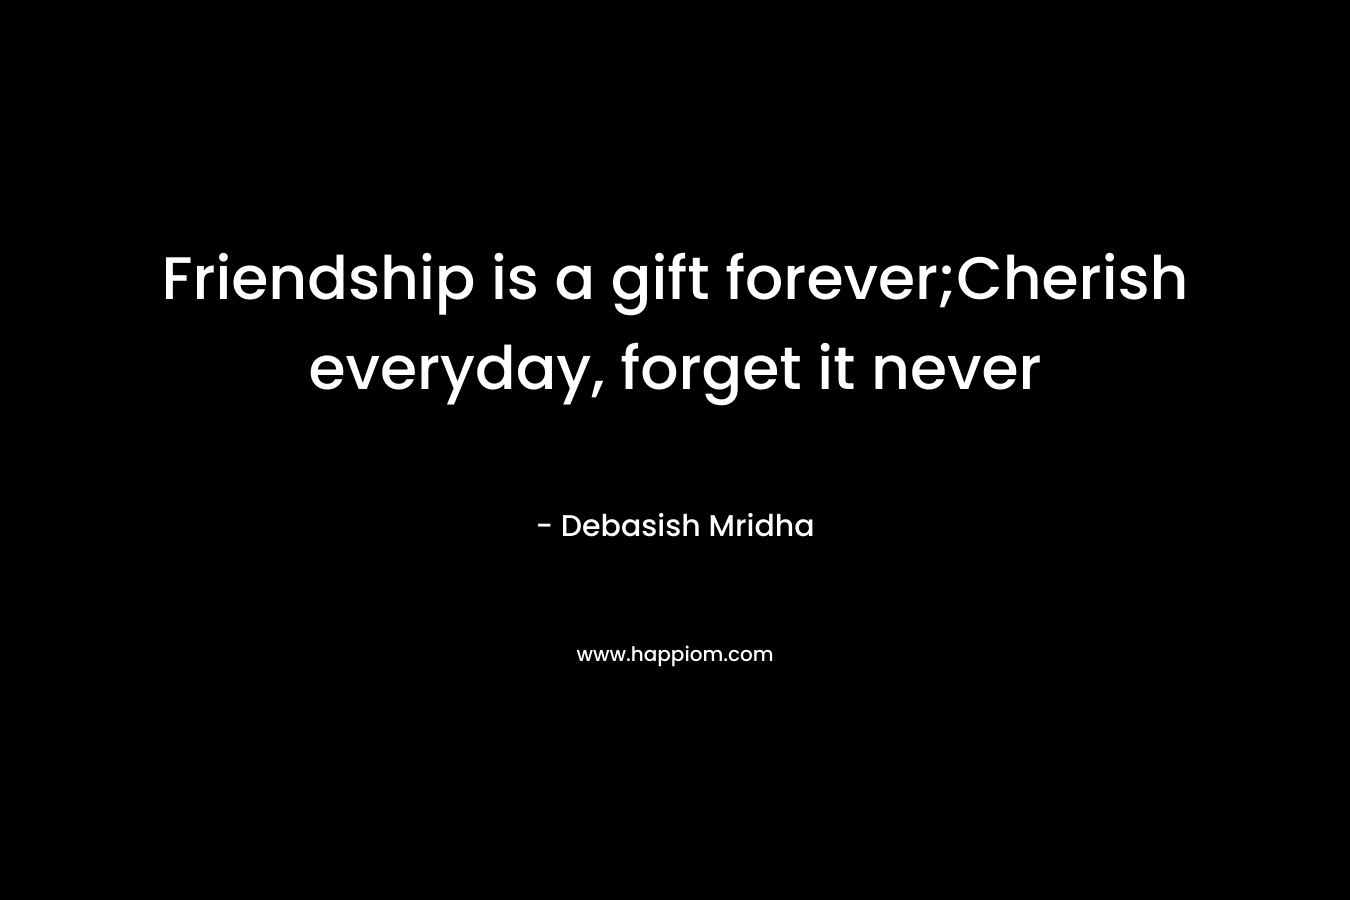 Friendship is a gift forever;Cherish everyday, forget it never